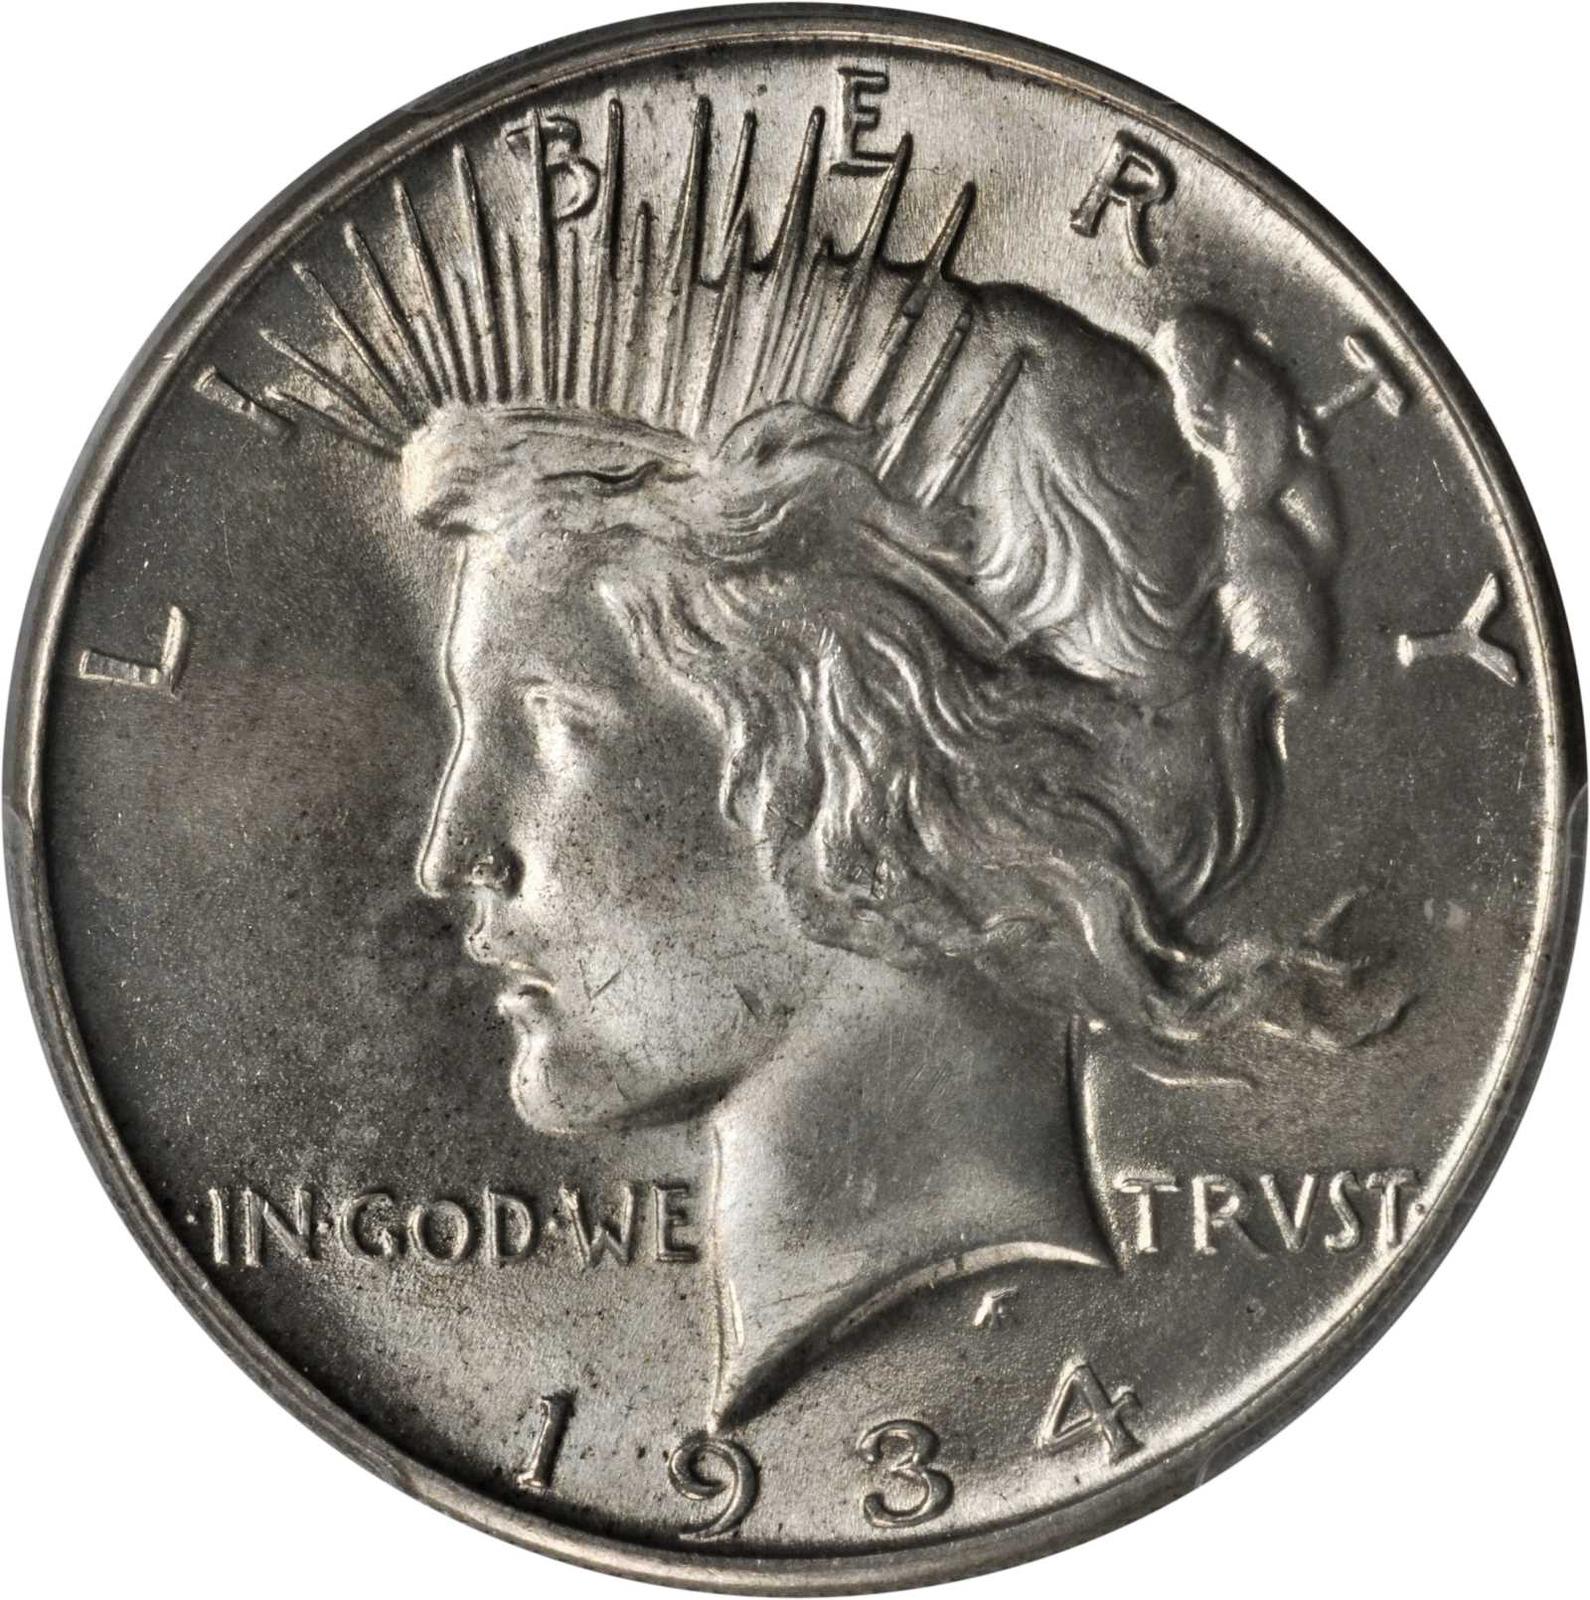 Value Of 1934 Silver Peace Dollar Rare Peace Dollar Buyer,Big Lebowski Drinking White Russian